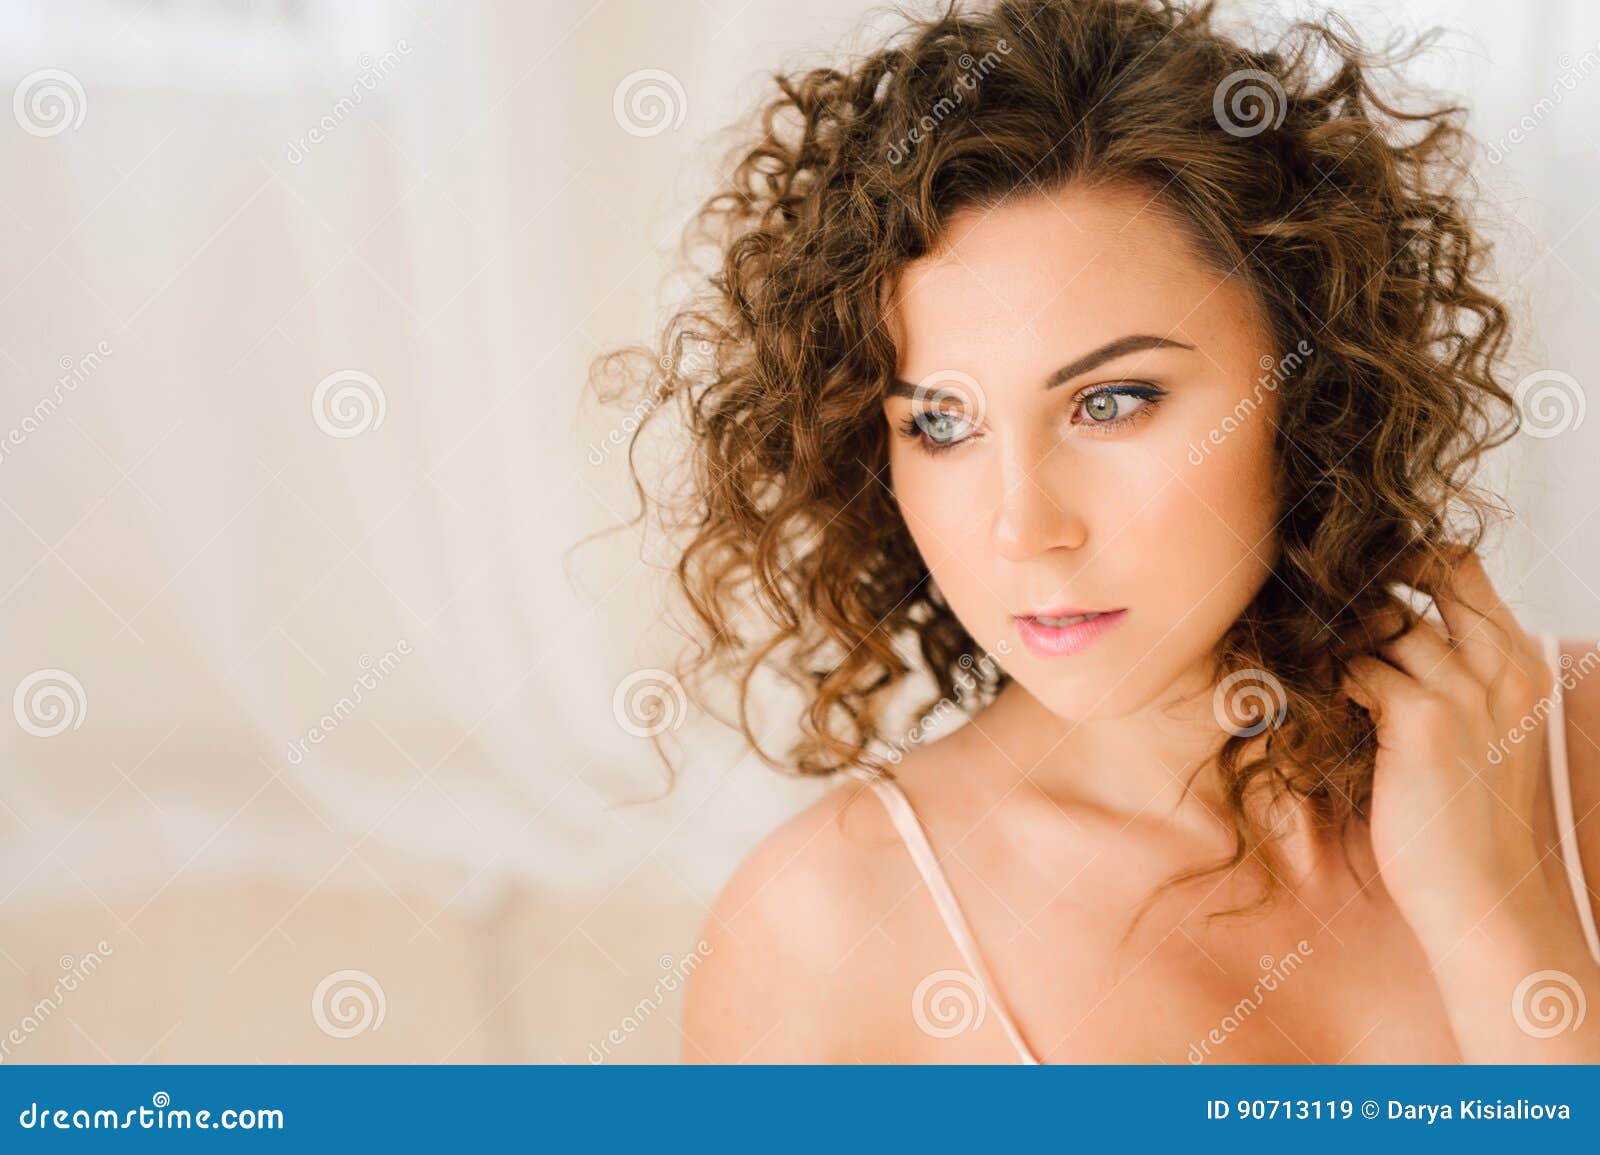 Woman In Bed In The Morning Showing Her Beautiful Body Awaken With Natural Light In Her Bedroom